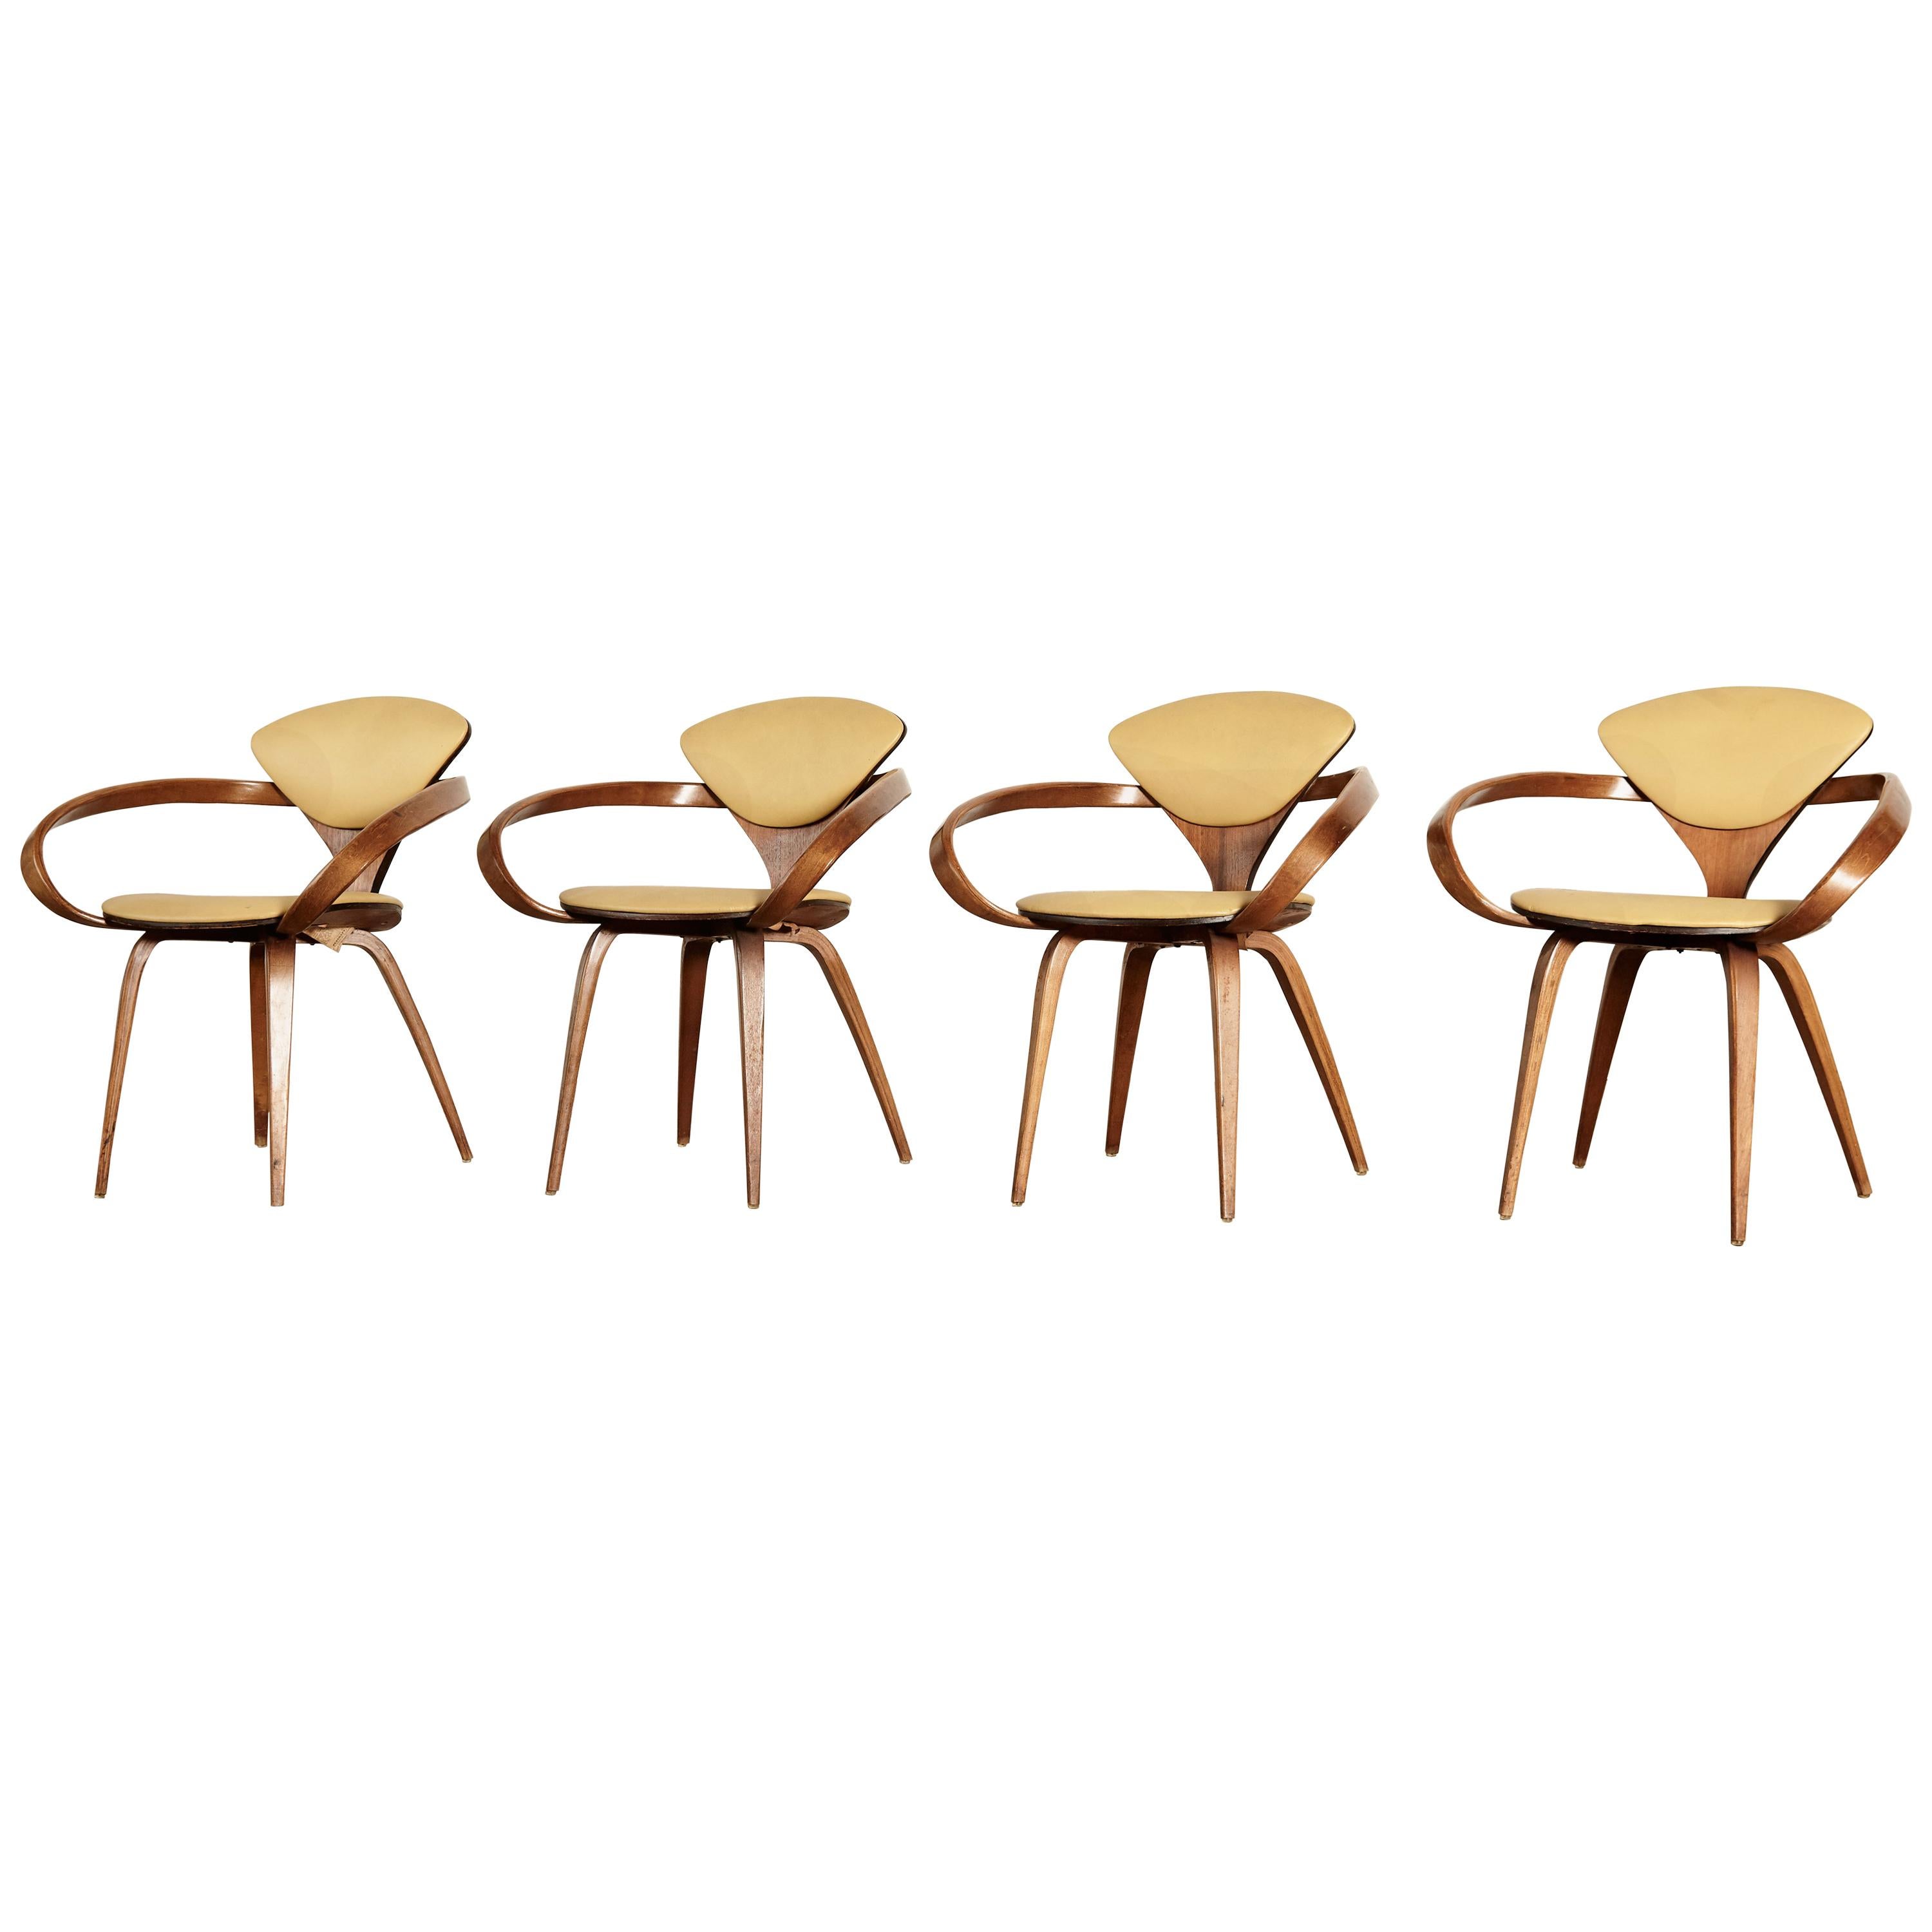 Set of Four Norman Cherner Pretzel Dining Chairs, Made by Plycraft, USA, 1960s